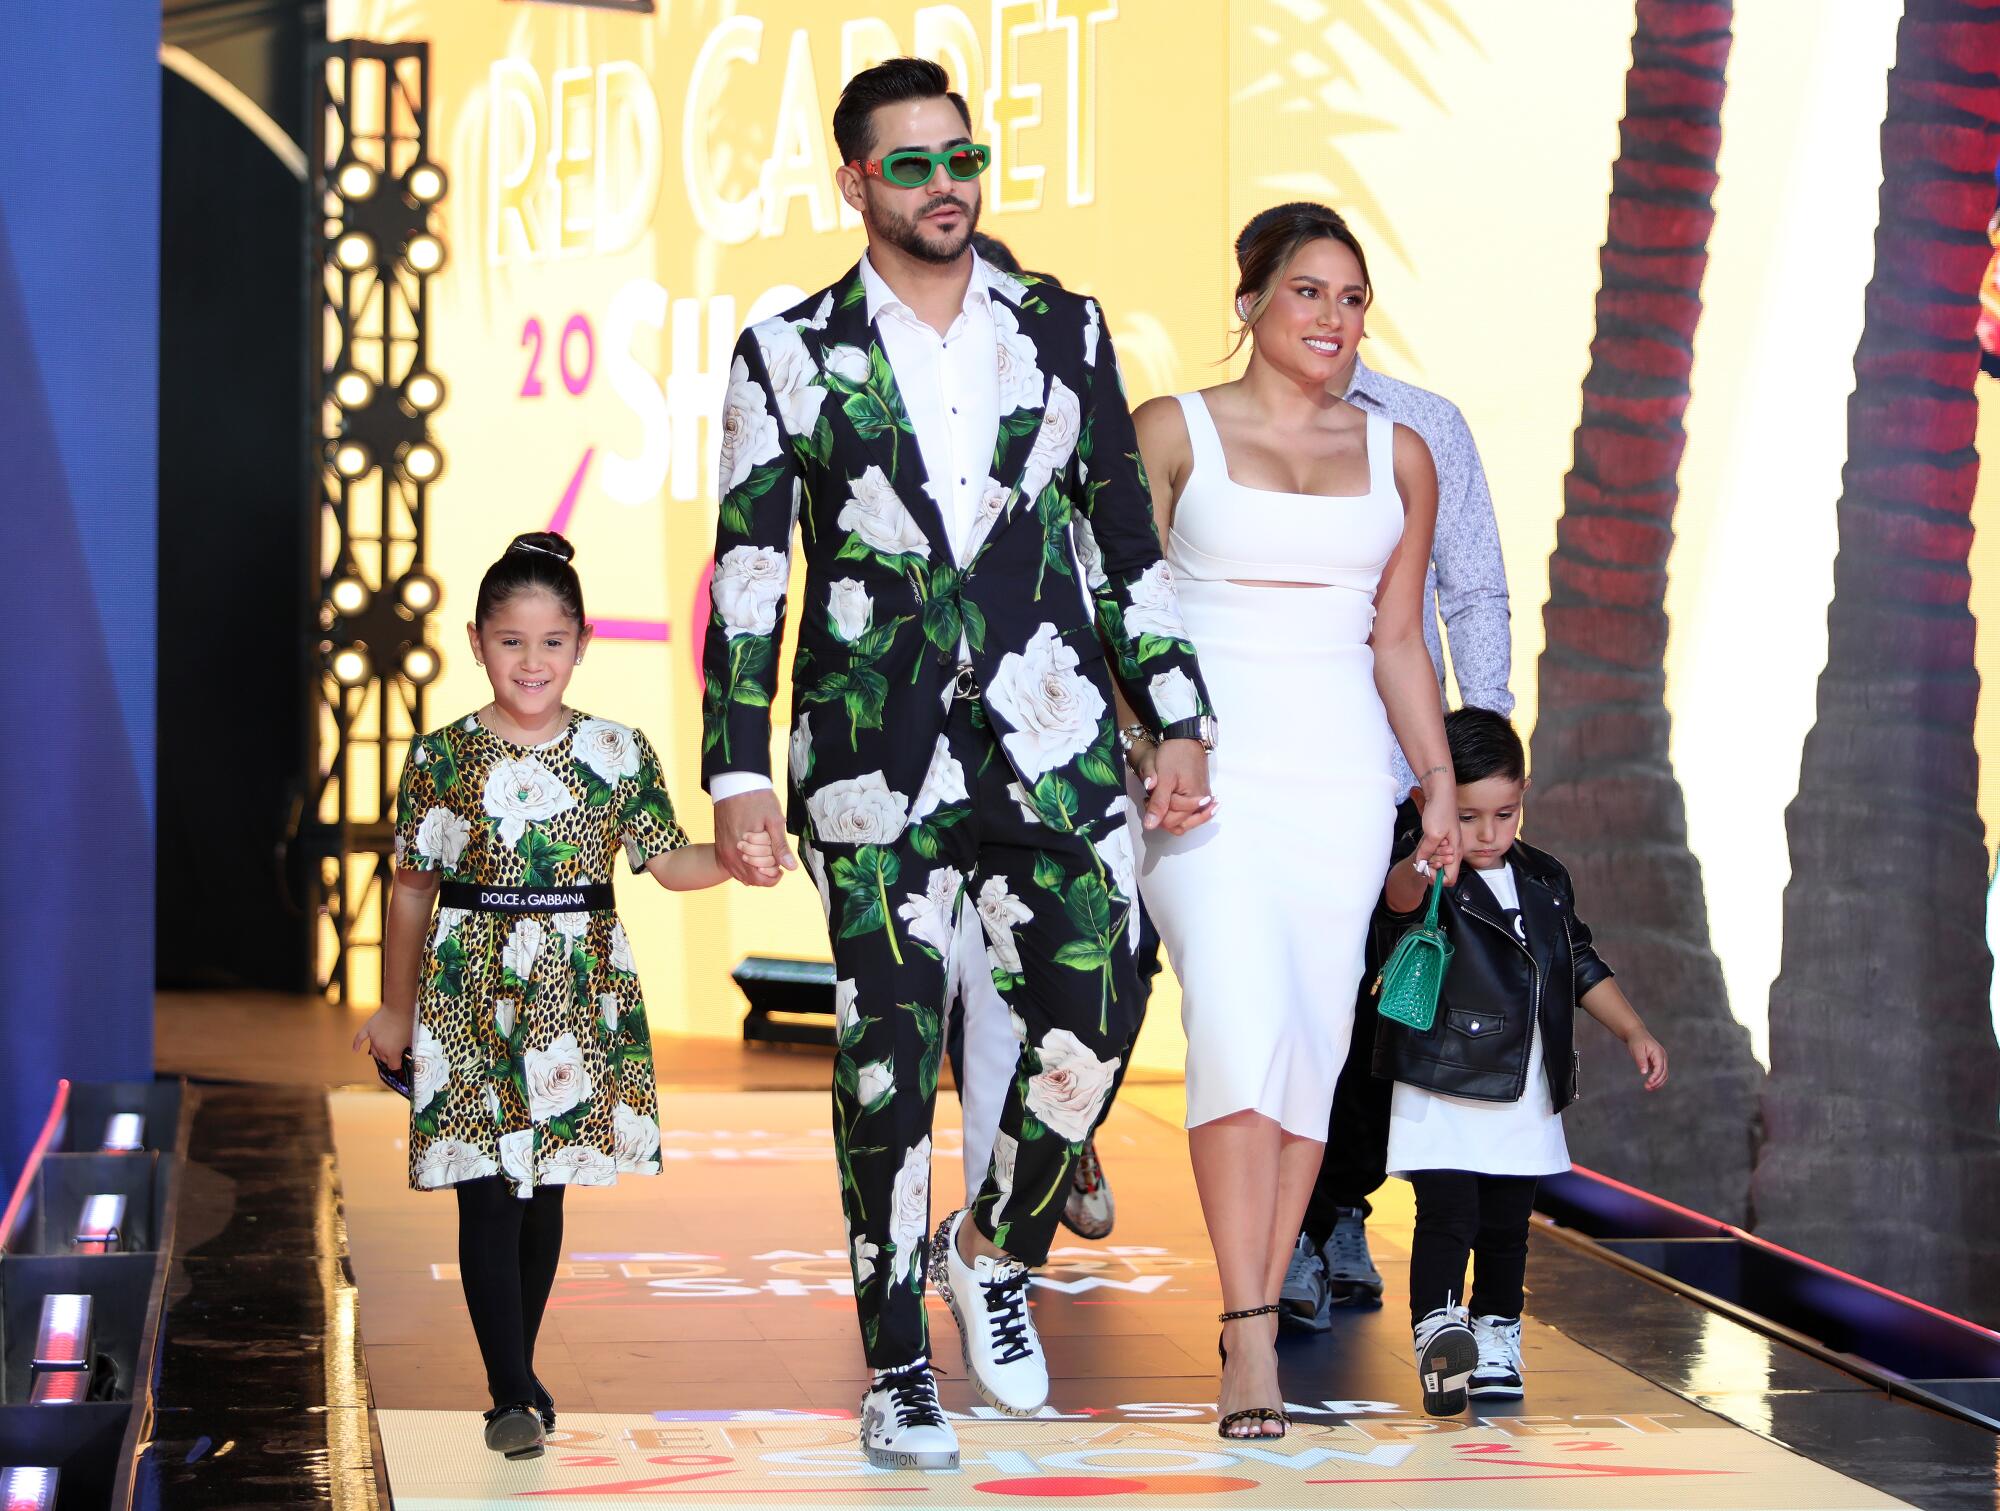 Martin Perez in a flower covered suit and family arrive at the 2022 MLB All-Star Game Red Carpet Show.